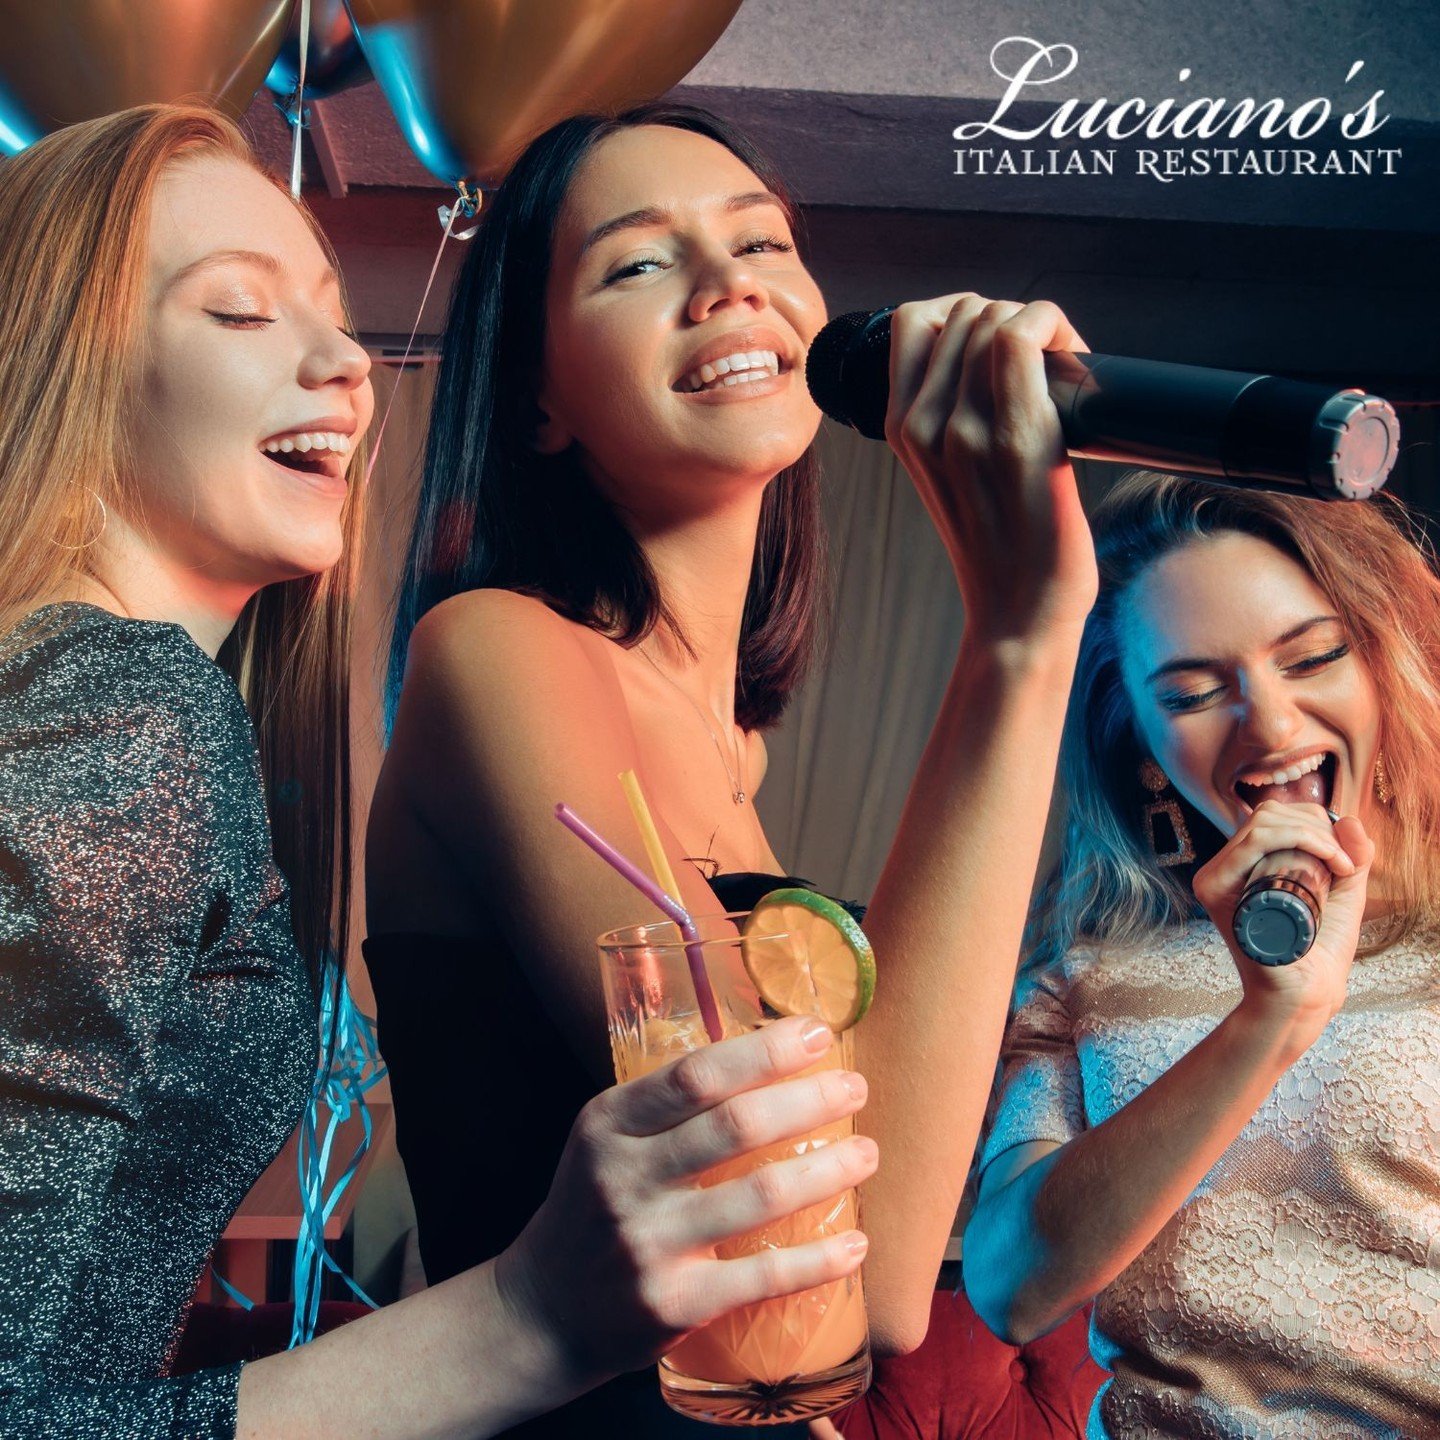 No karaoke at Luciano's this Tuesday due to the Memorial Day weekend&mdash;join us the following Tuesday for our next session!